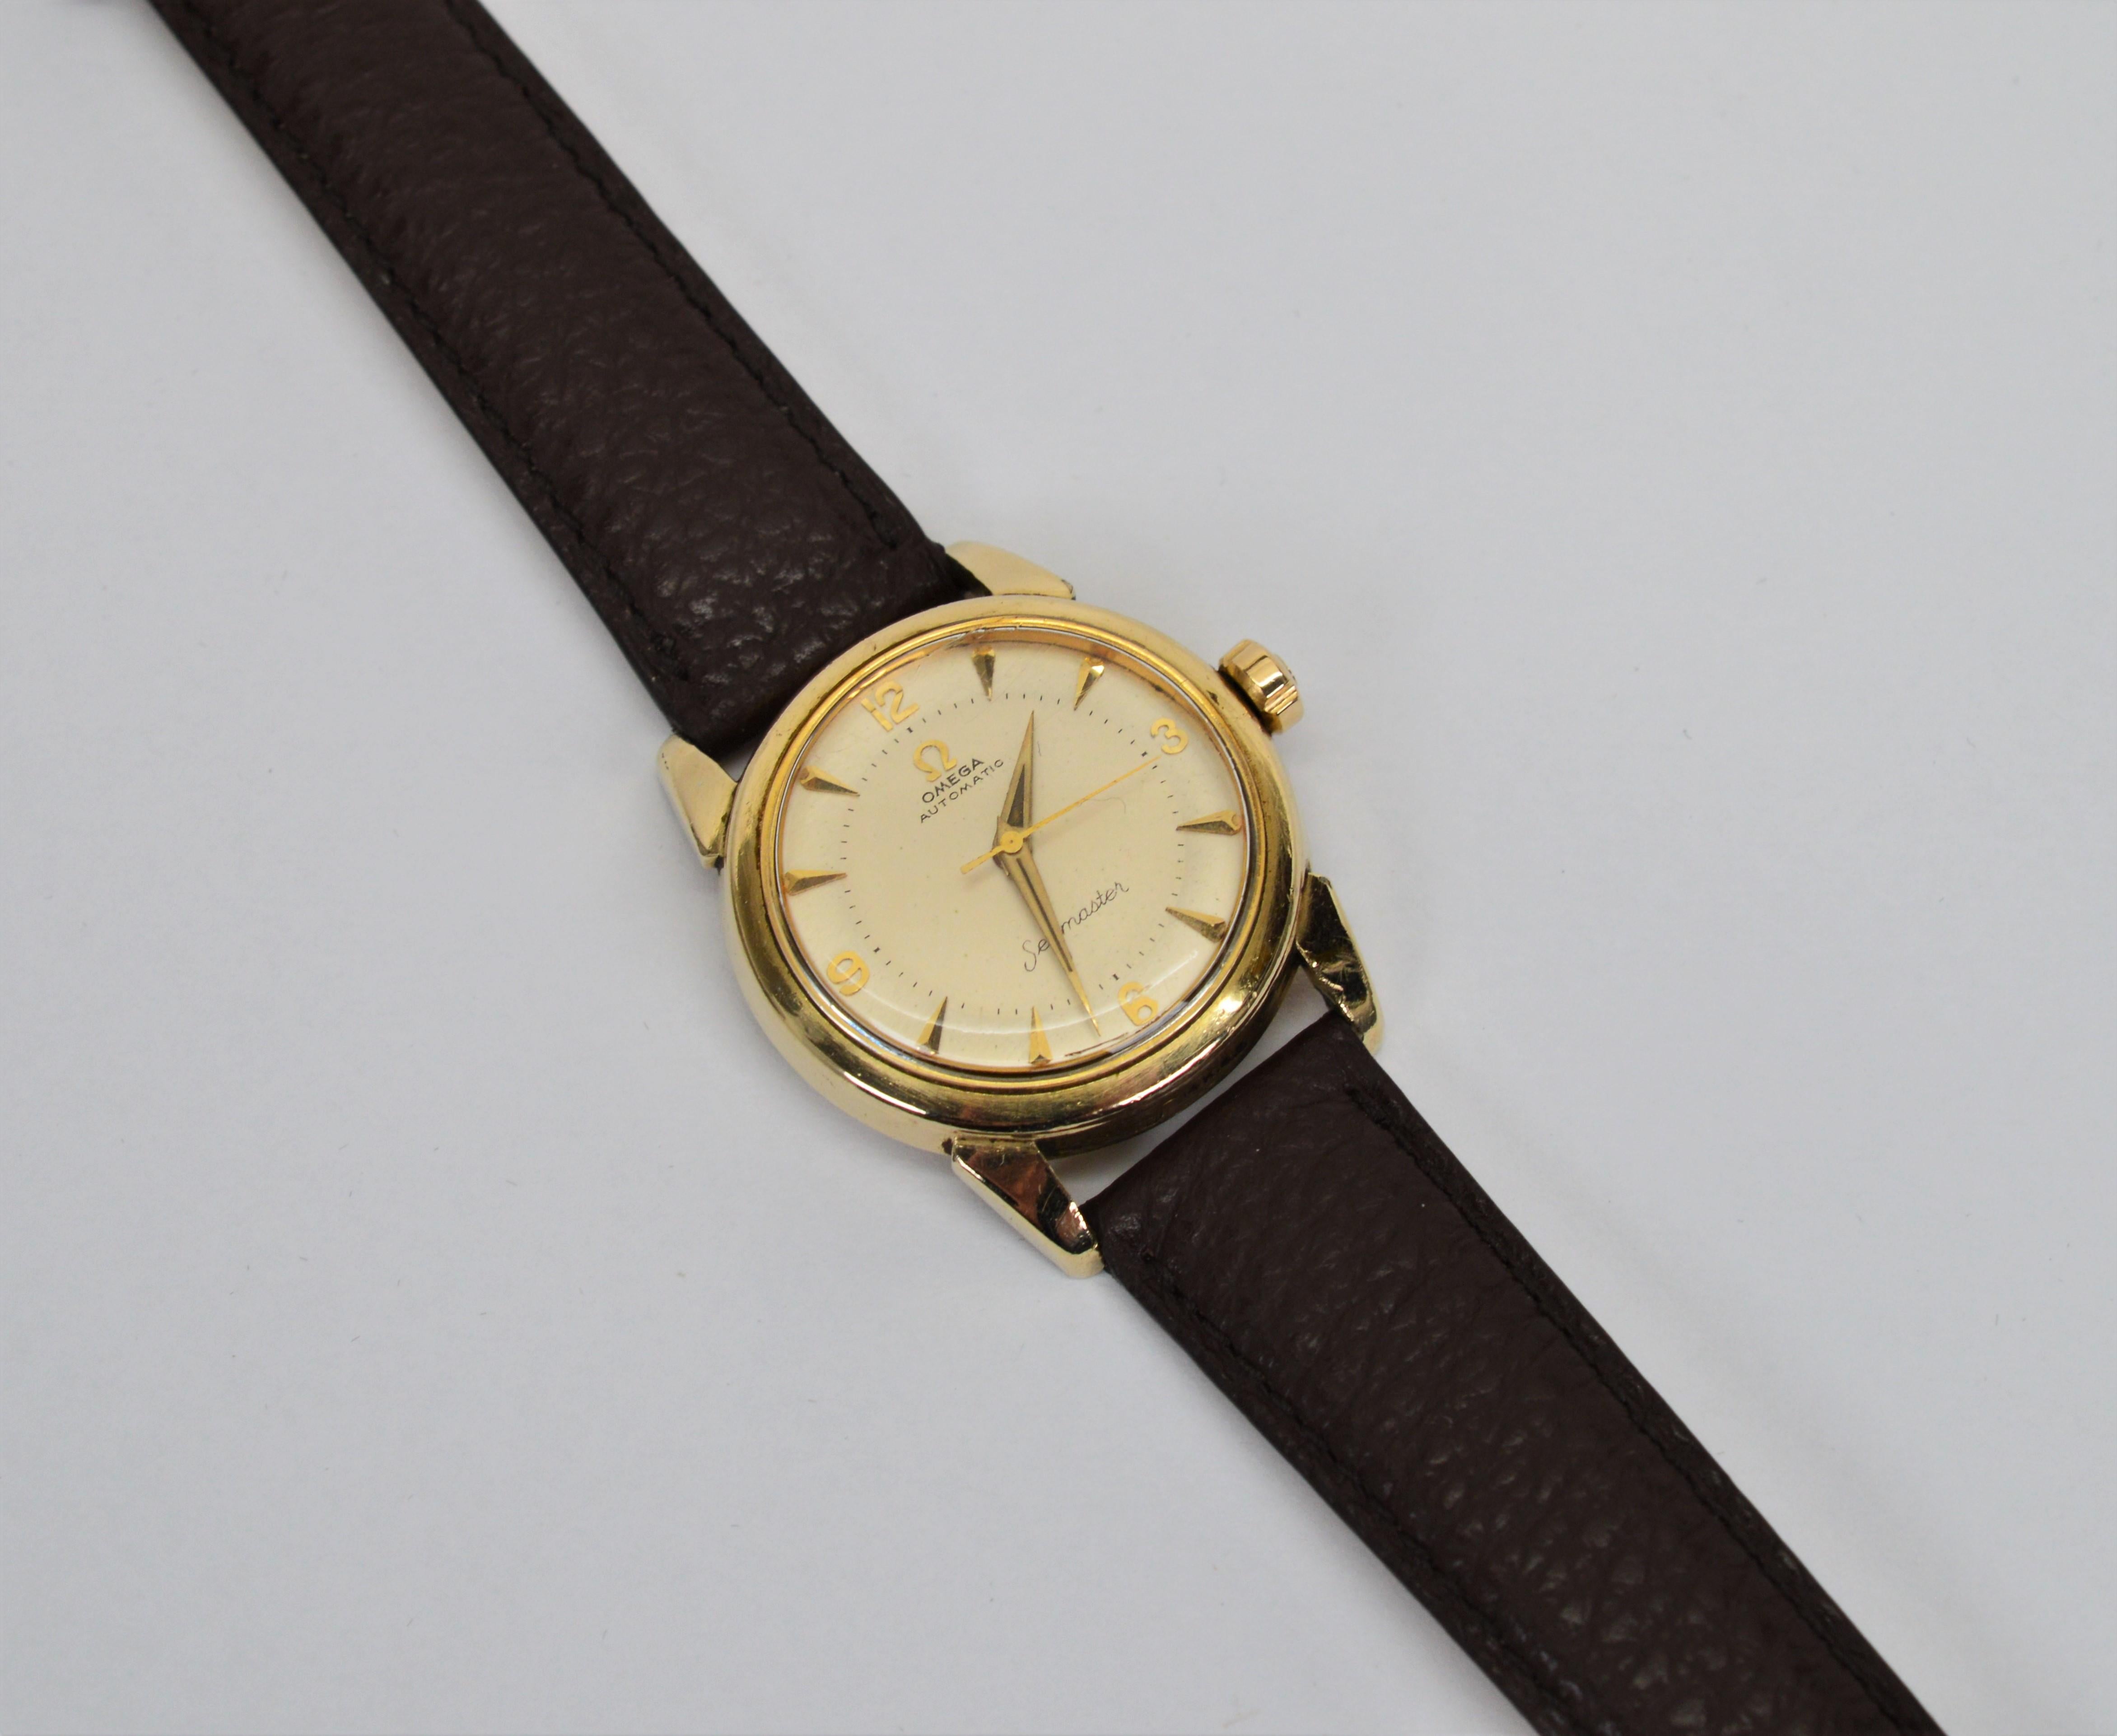 Circa 1950's, stylish and wildly popular, this men's Omega Seamaster Model 2823 Gold Filled Wrist Watch is a great find in its fine condition. Reliable, collectable and affordably priced this vintage timepiece has a case measurement of 32mm. The